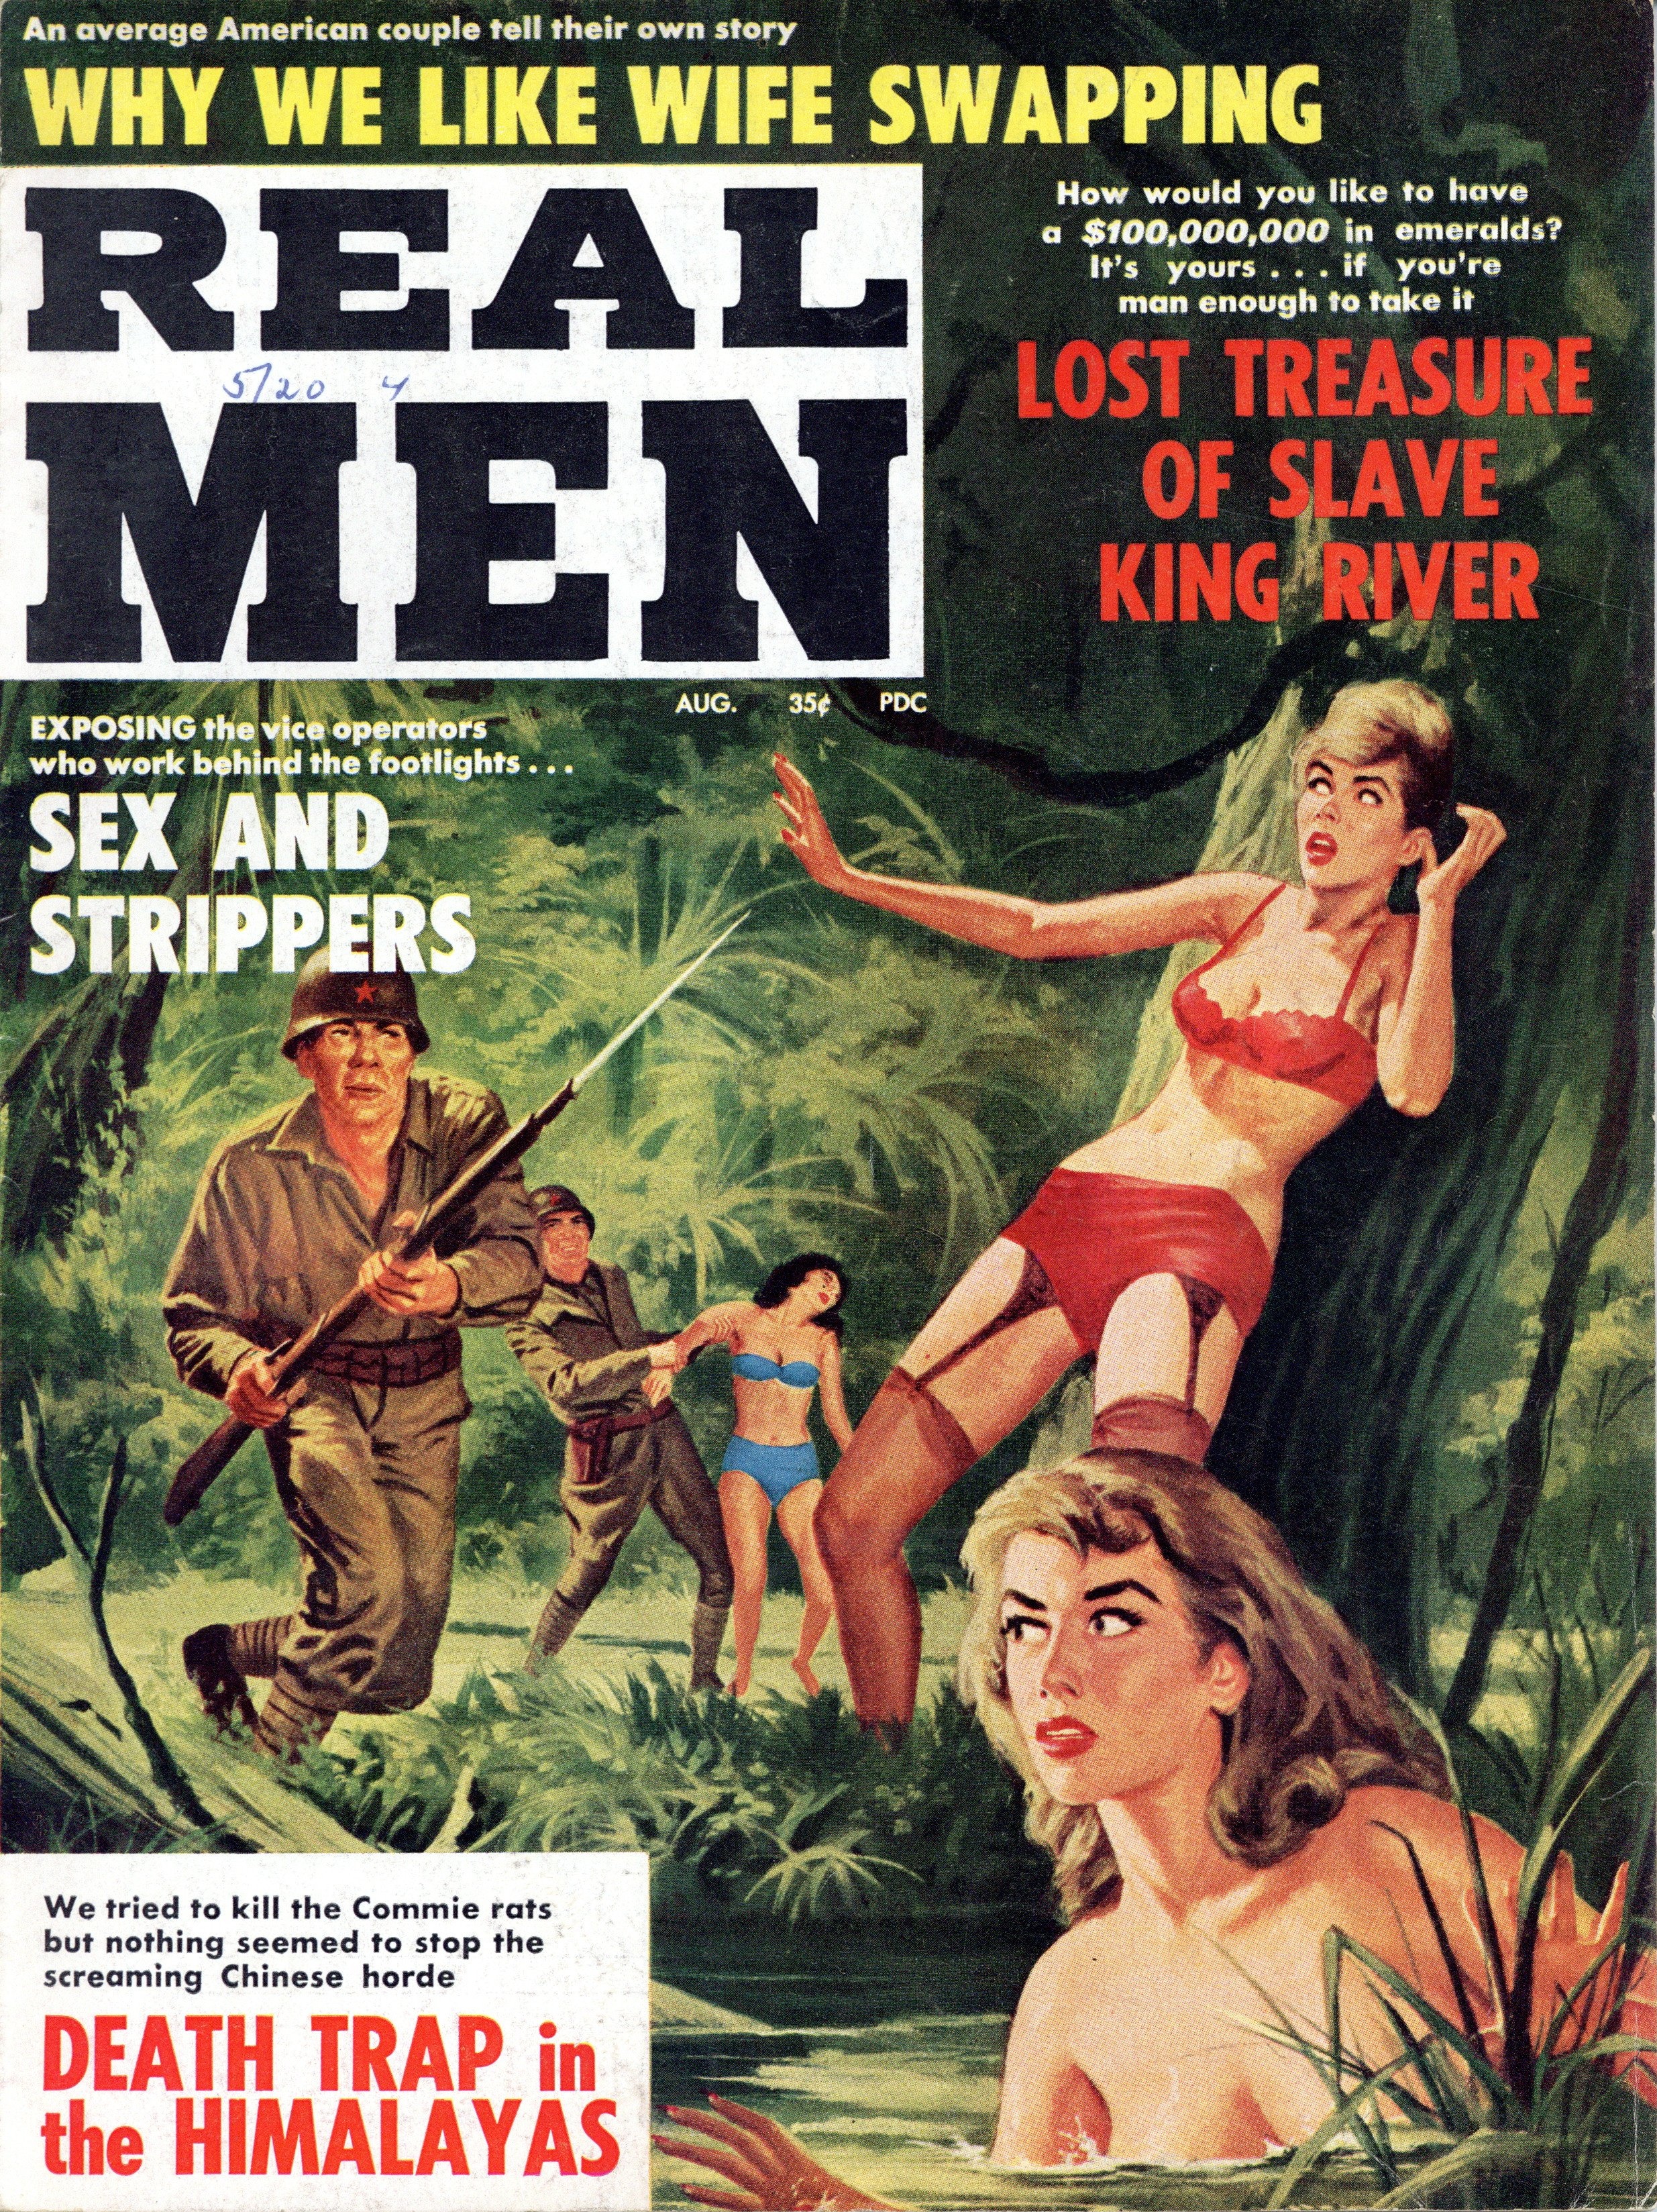 Lost Treasure Of Slave King River -- Pulp Covers photo photo